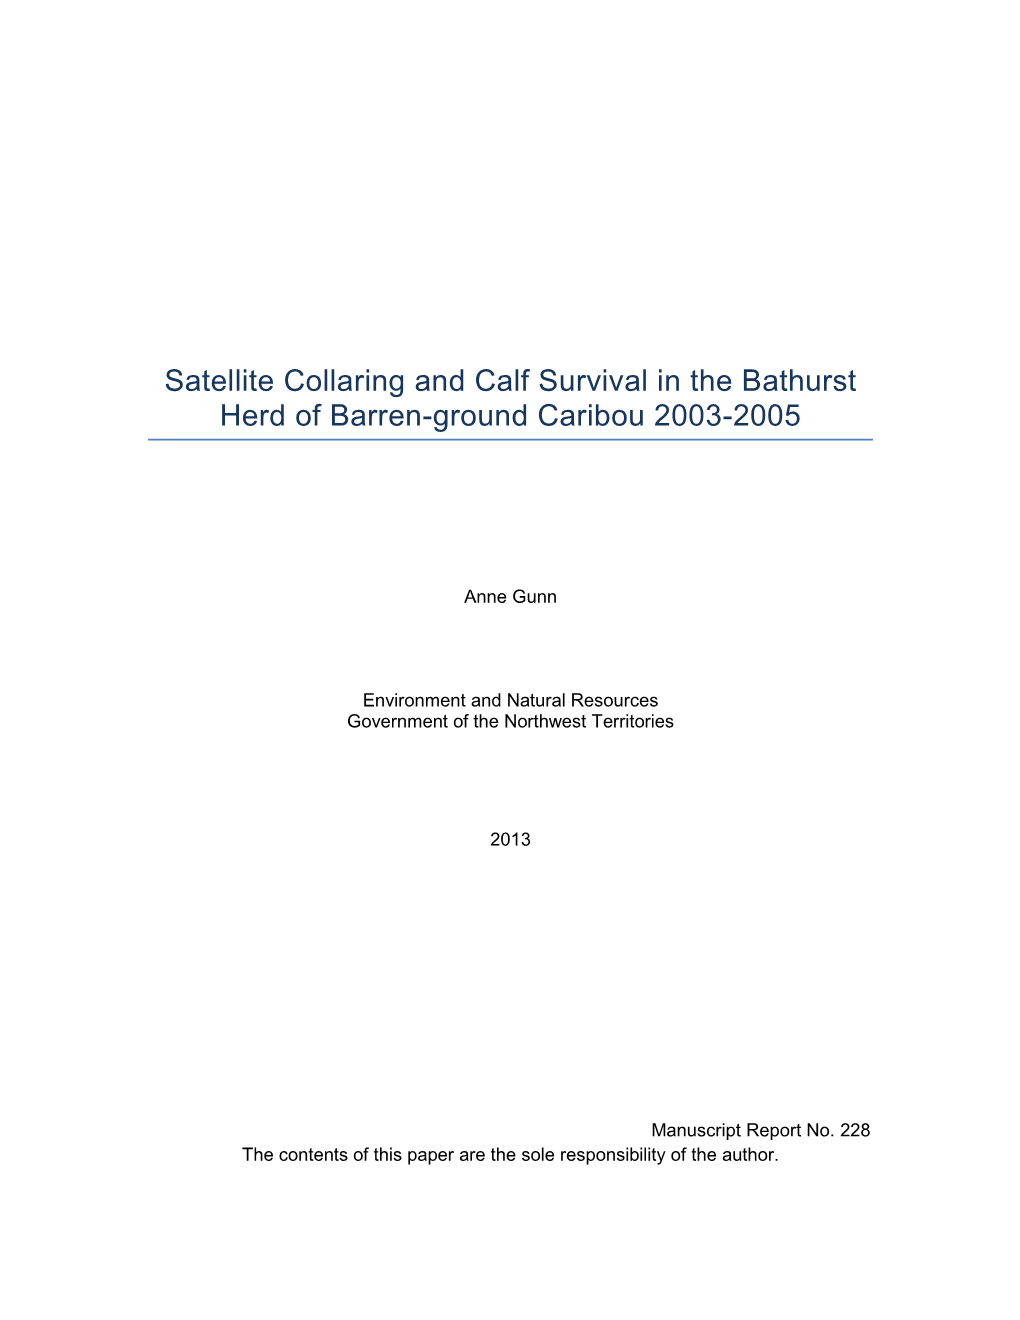 Satellite Collaring and Calf Survival in the Bathurst Herd of Barren-Ground Caribou 2003-2005